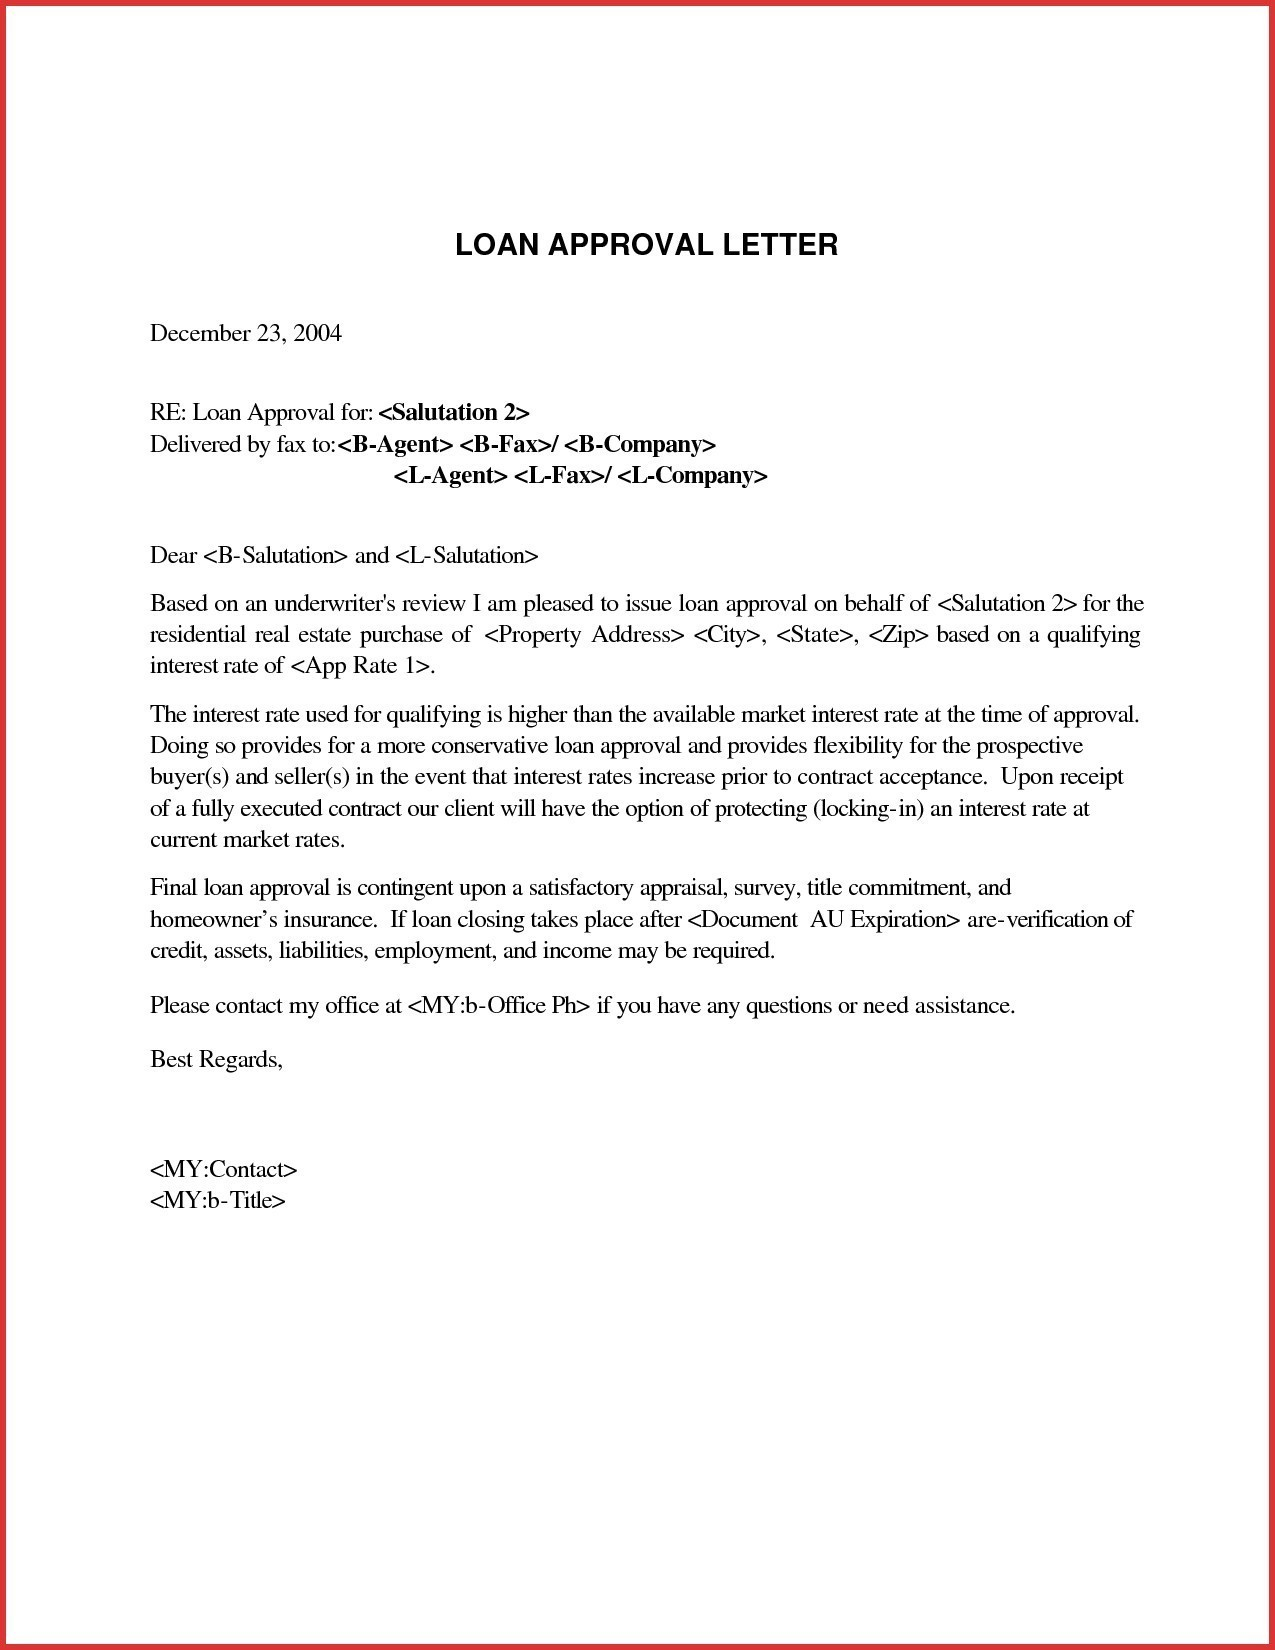 Mortgage Loan Approval Letter Template Samples - Letter Template Collection